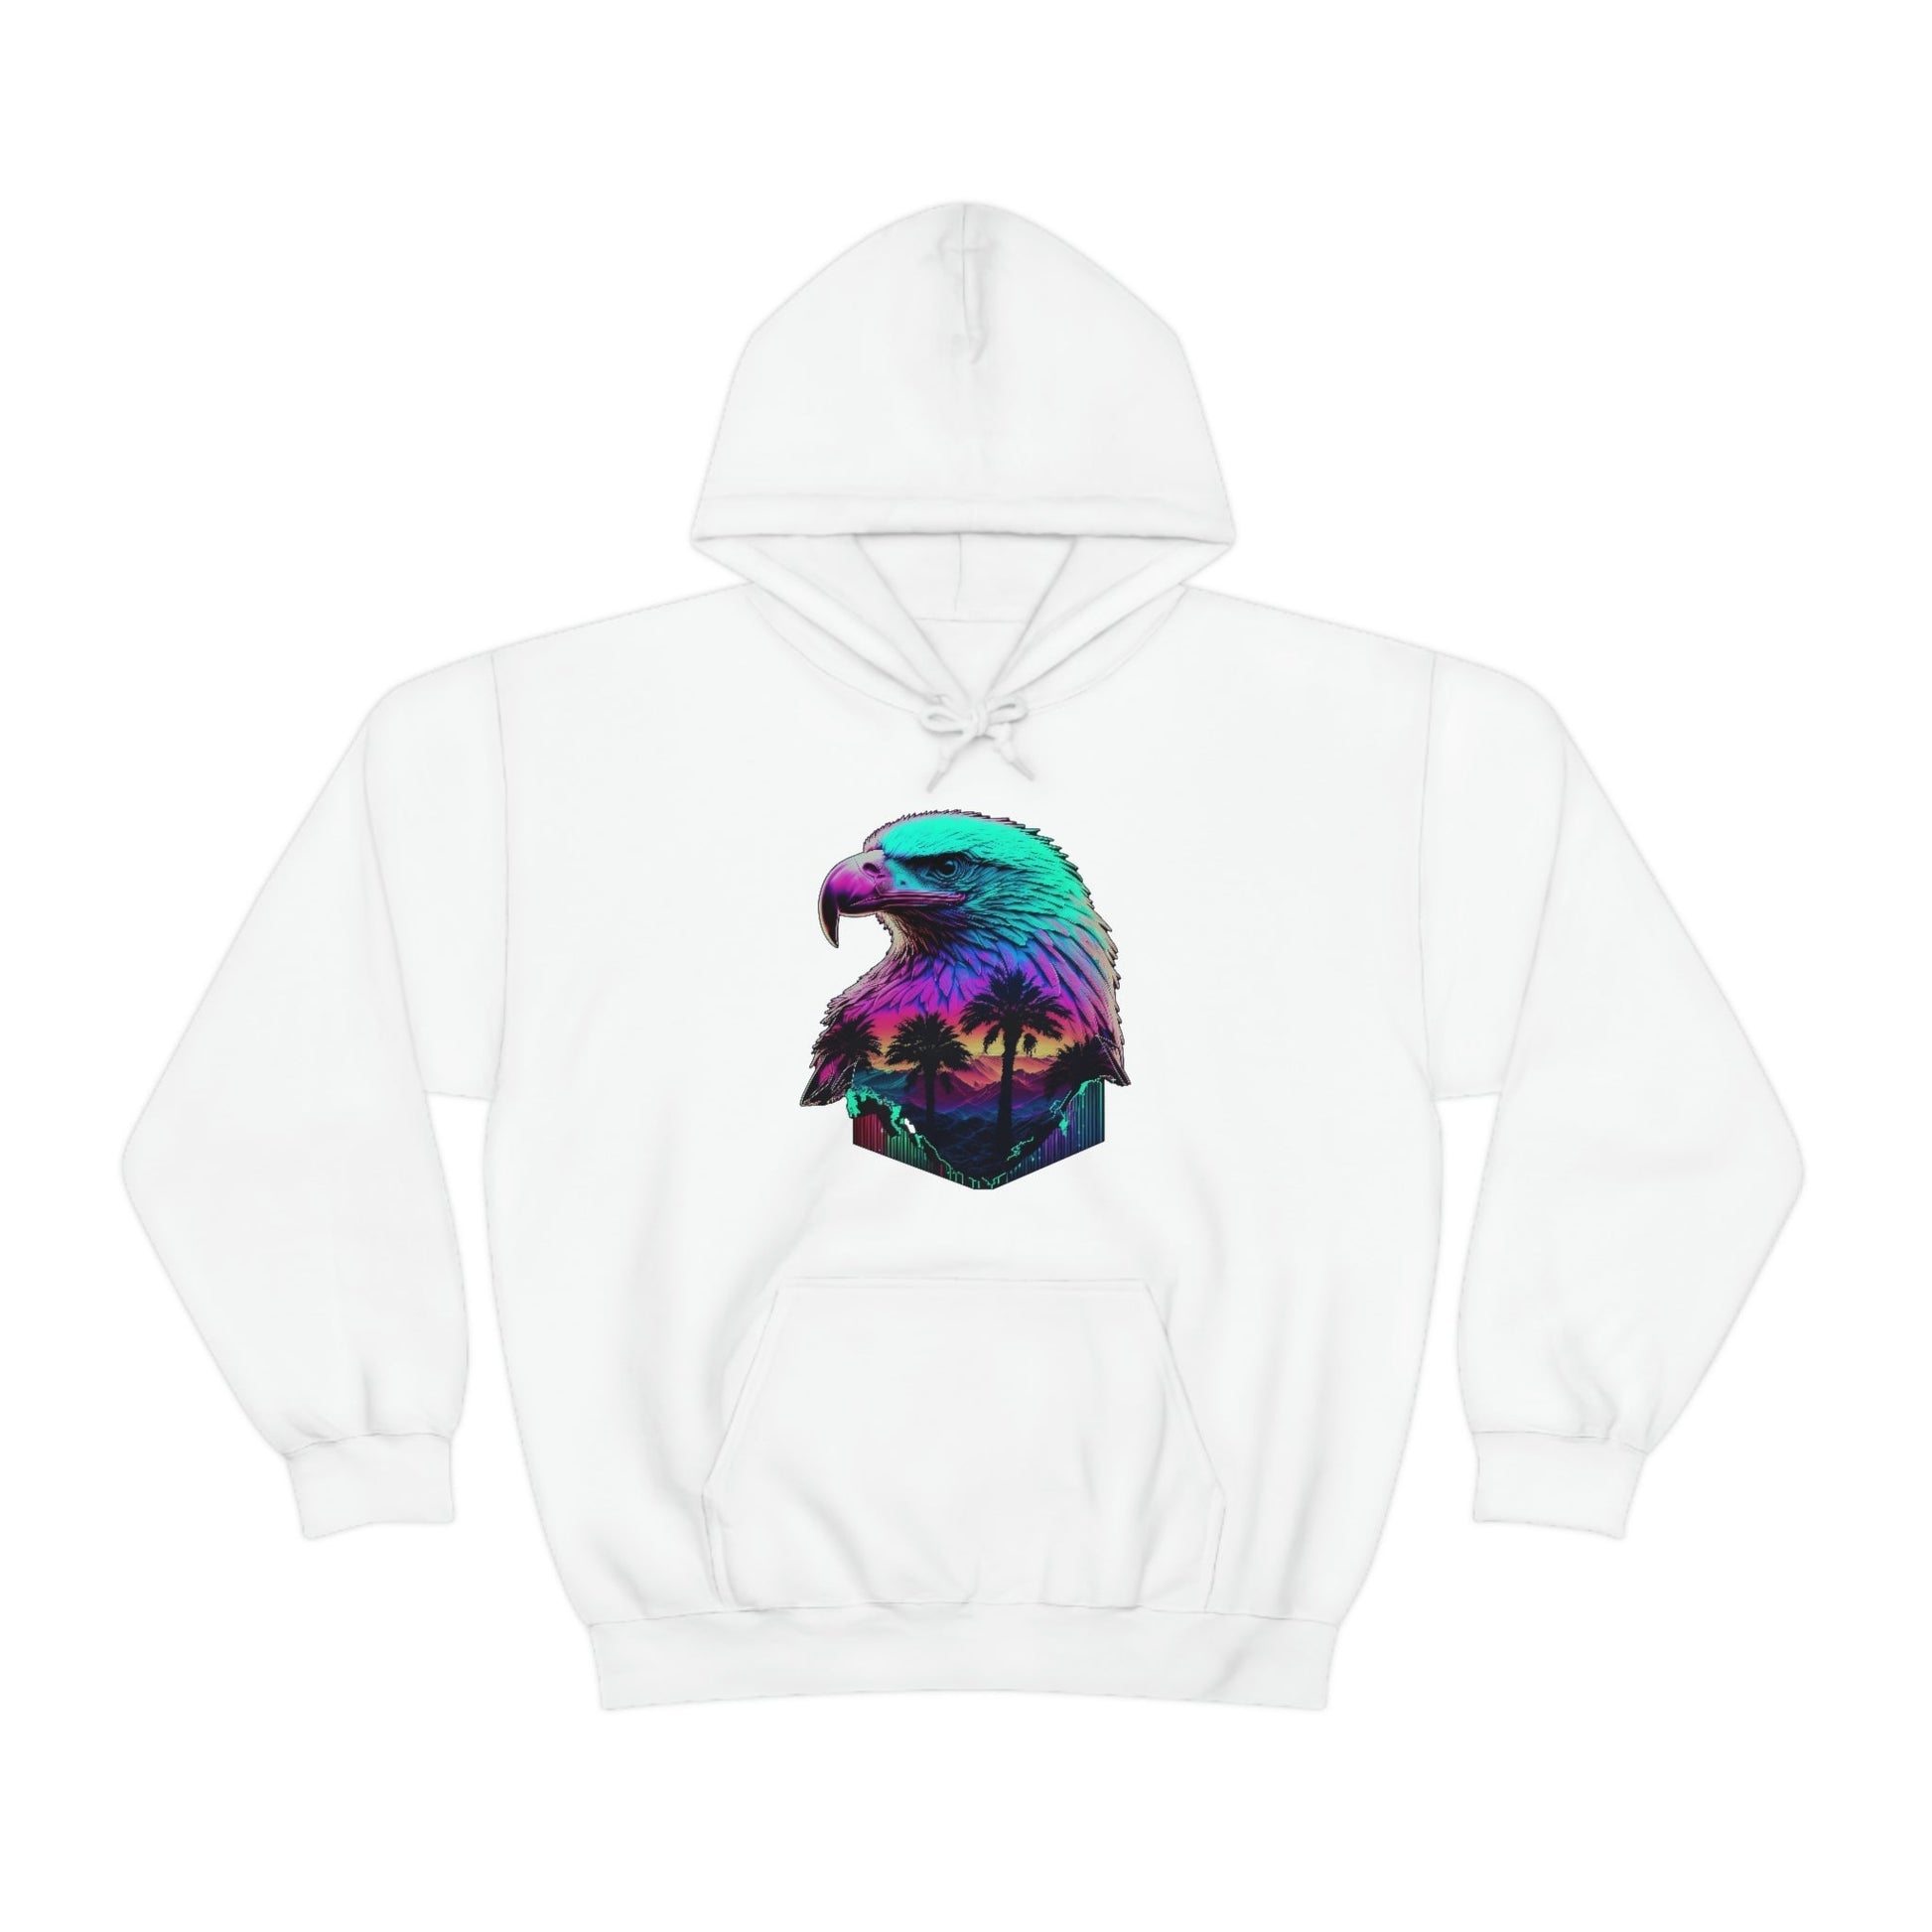 Womens and Mens Patriotic Hoodies - Land of the Vapor, Home of the Wave - Bind on Equip - 29484819232871000389